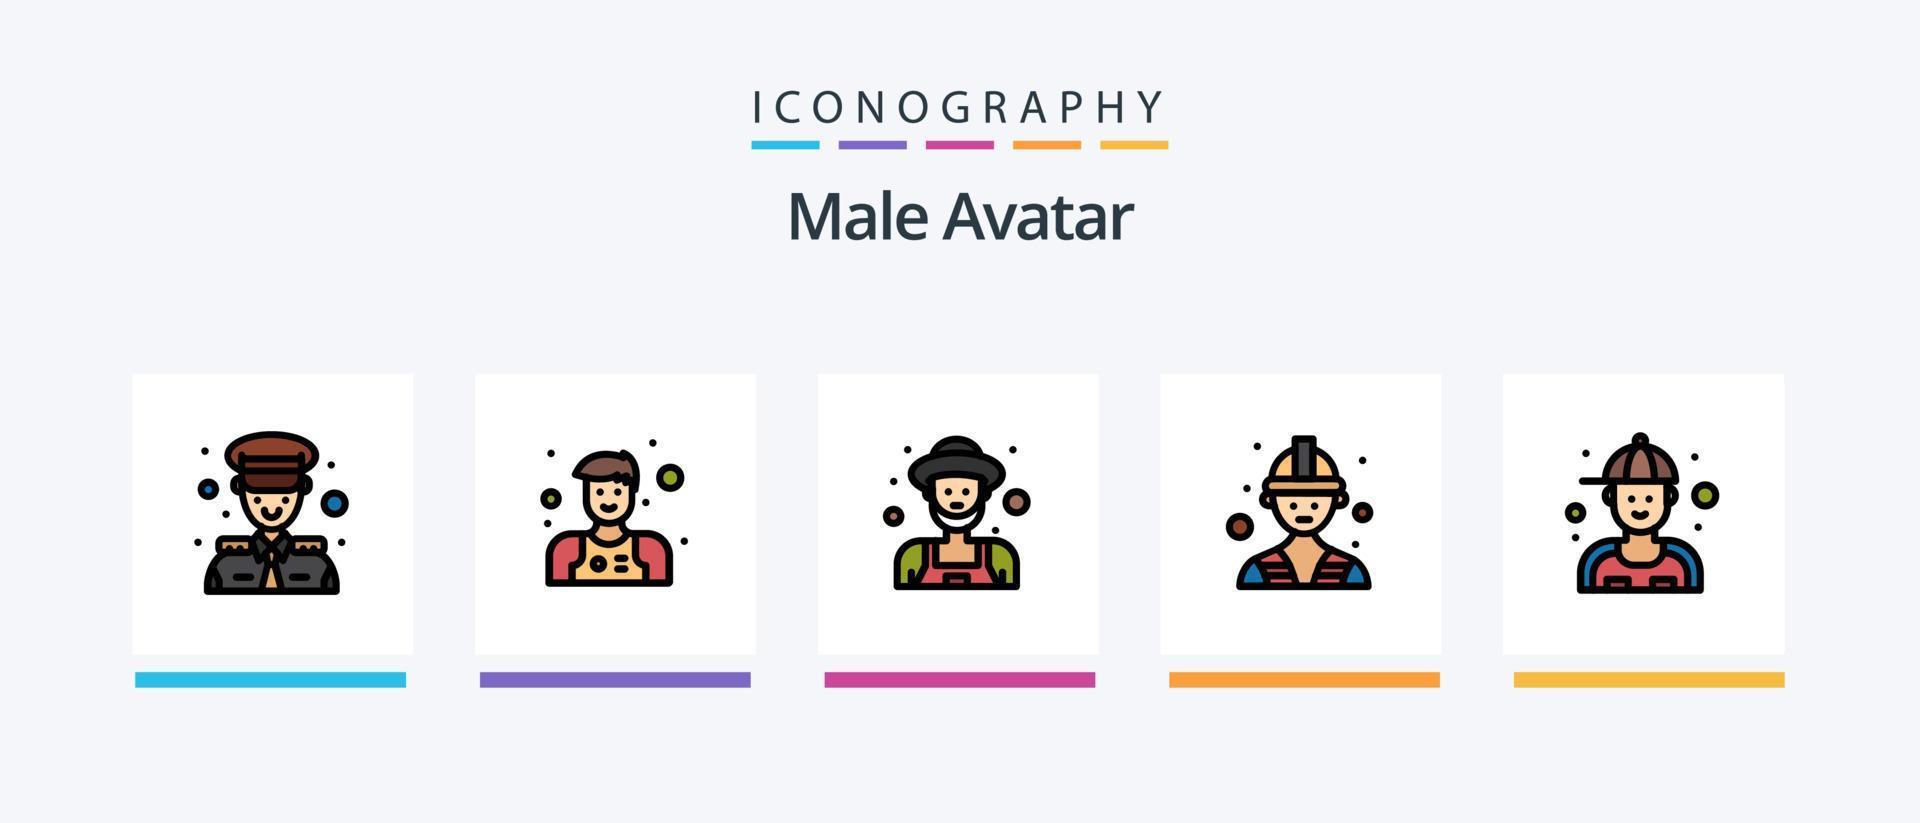 Male Avatar Line Filled 5 Icon Pack Including photo. image. counselor. camera. man. Creative Icons Design vector